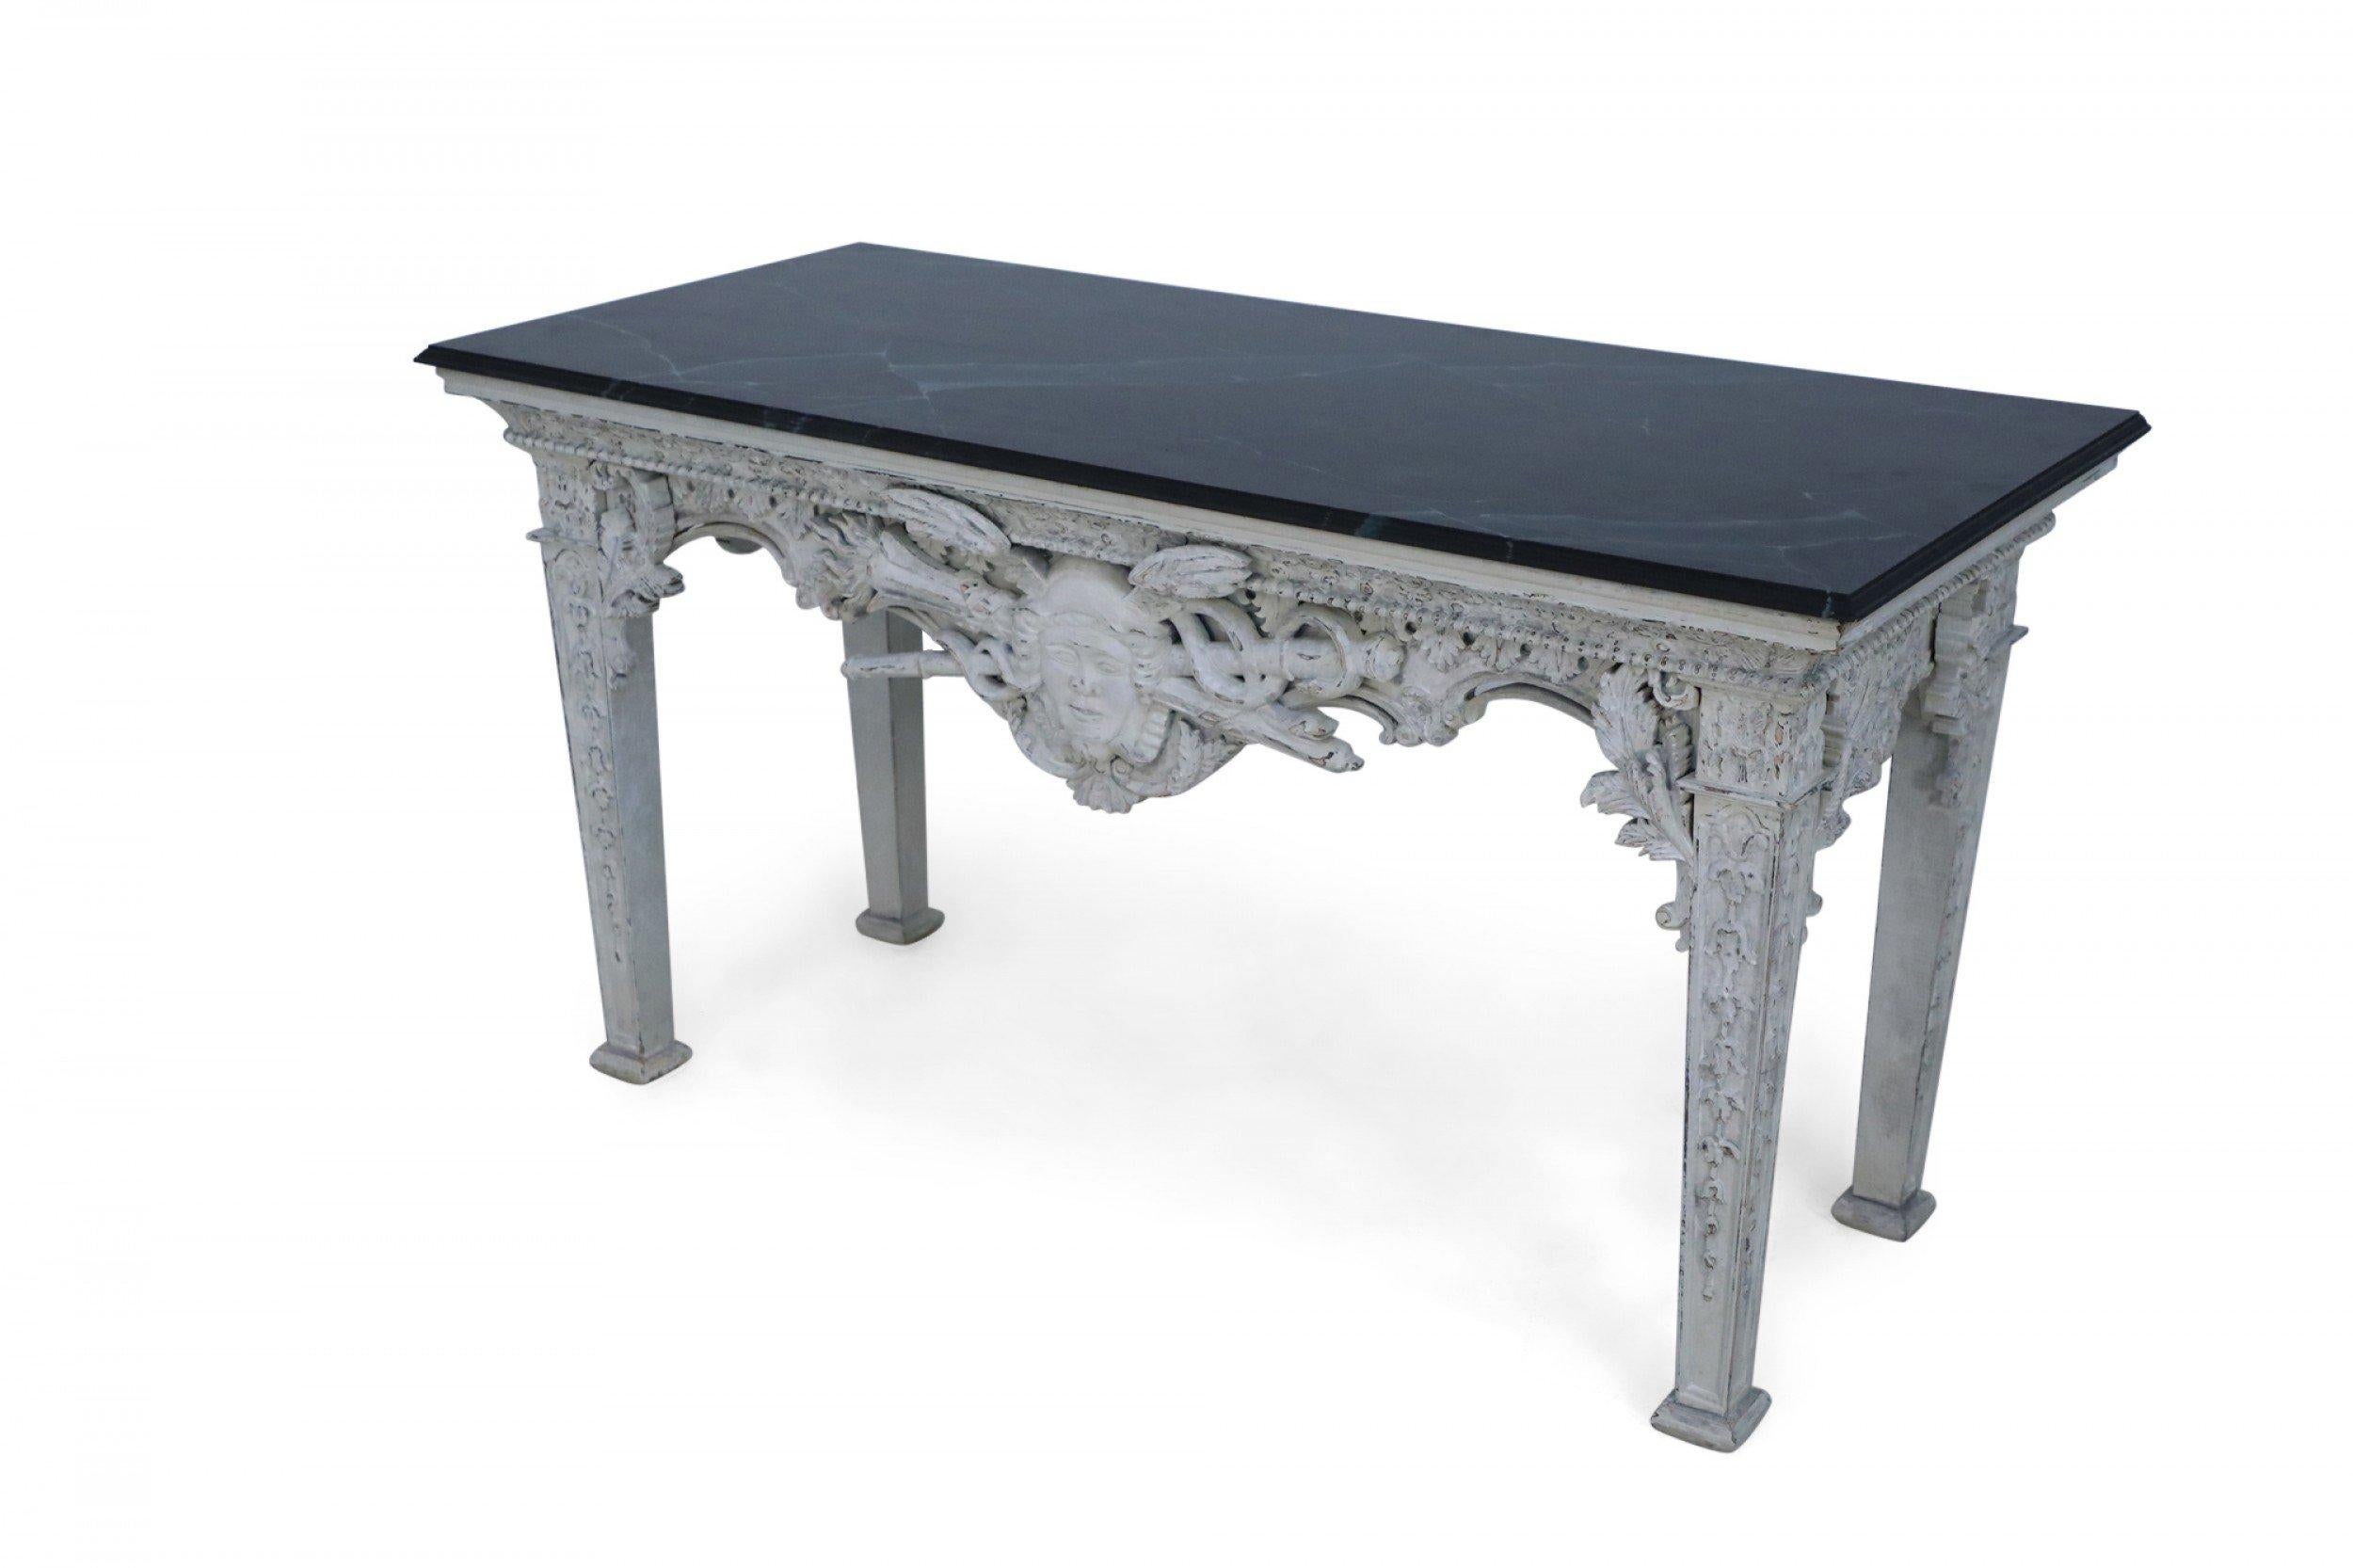 Italian neo-classic-style (modern) rectangular console table combining a white-painted, distressed base carved with a central face sitting above a torch crossed with a caduceus at the front apron, carved legs and a smooth painted faux marble top in